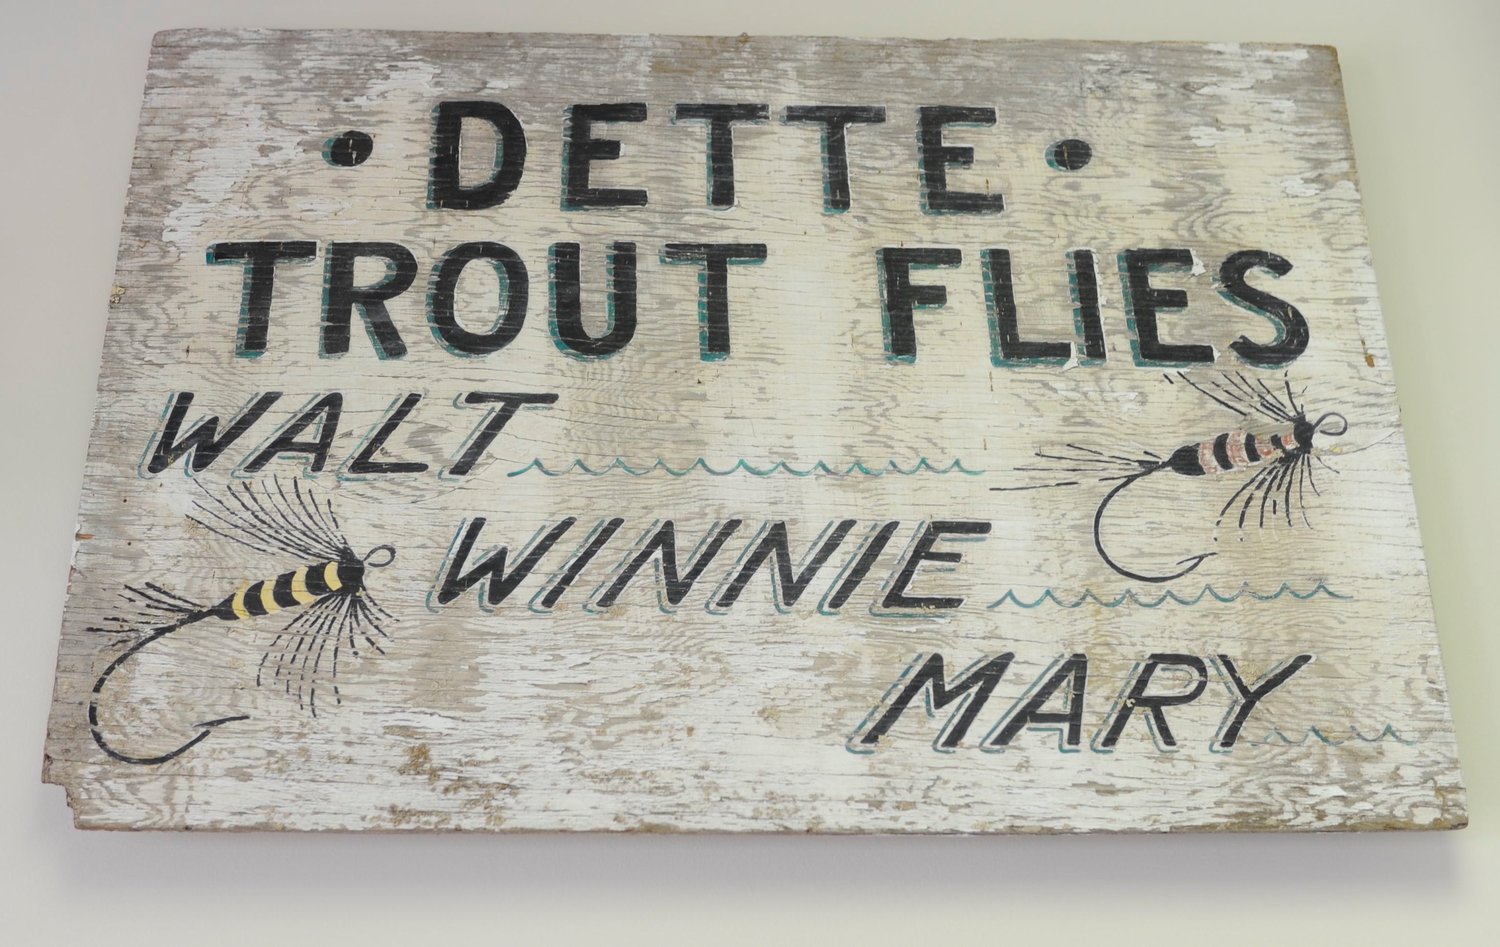 Sign of by-gone times. The original sign from Dette Trout Flies when it was run by Walt and Winne Dette, along with their daughter, Mary, who while not in the area, still ties flies.